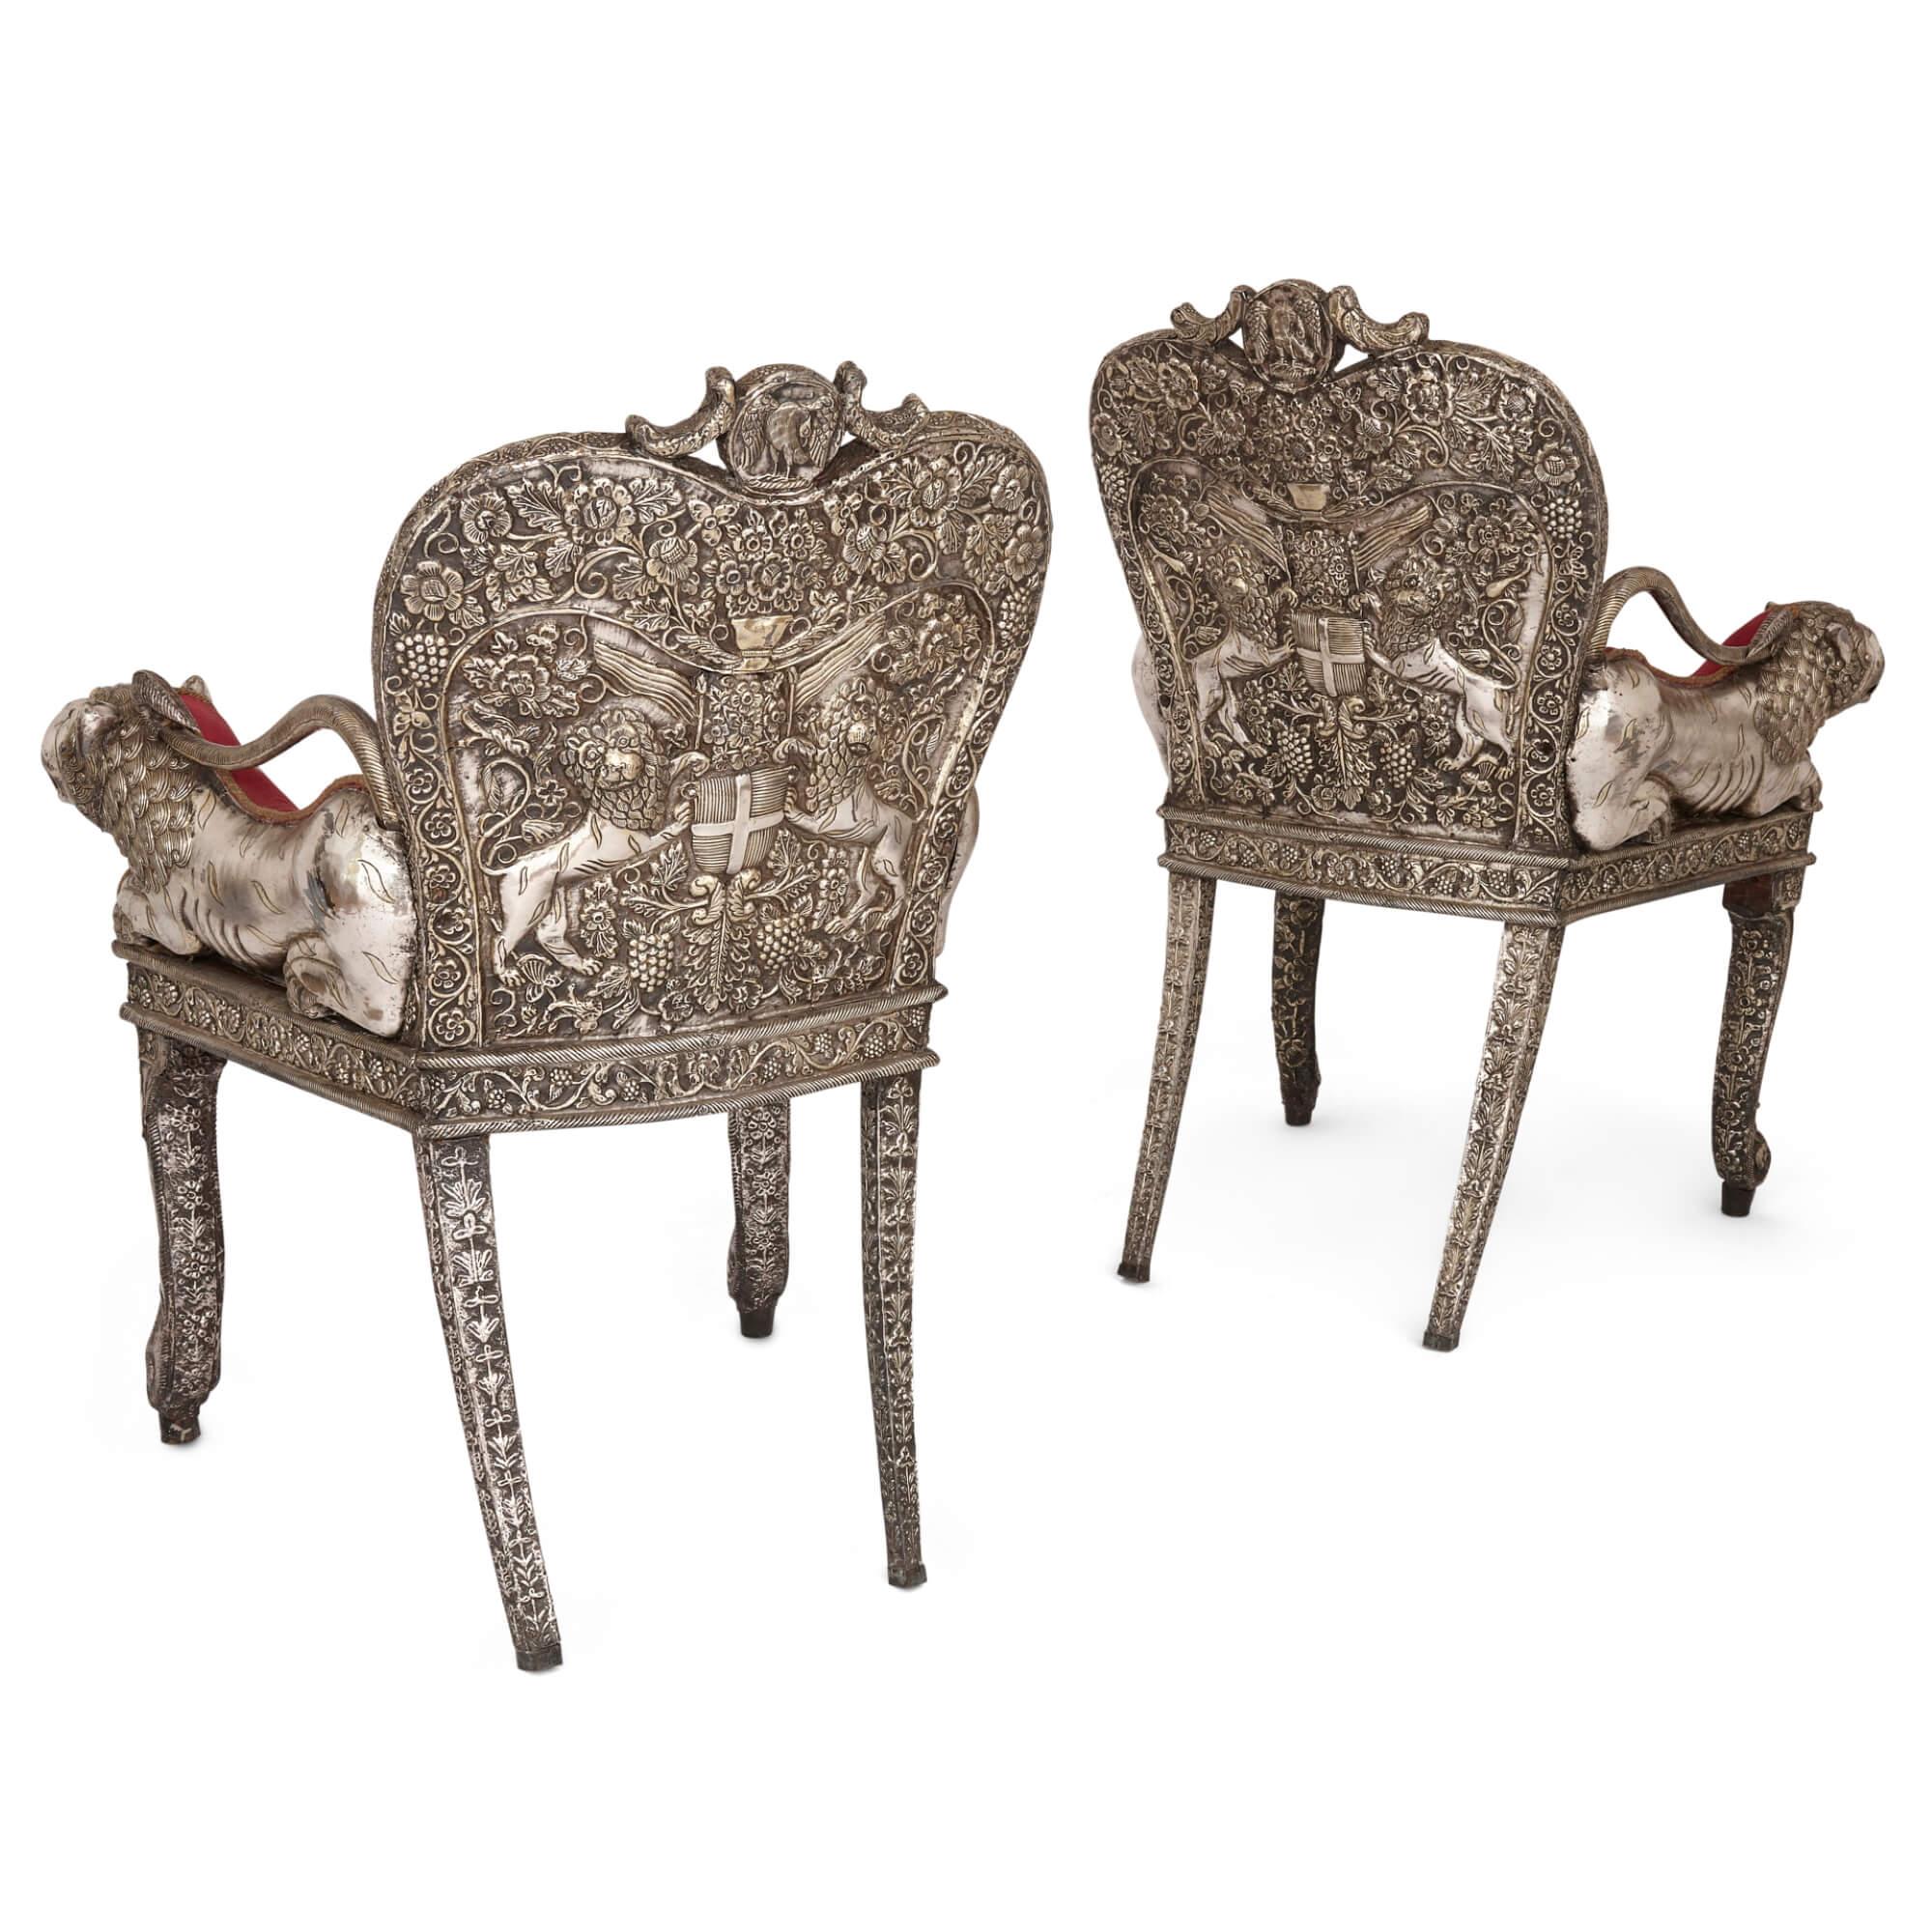 Anglo-Indian Pair of Indian Repoussé Silver Upholstered Chairs 